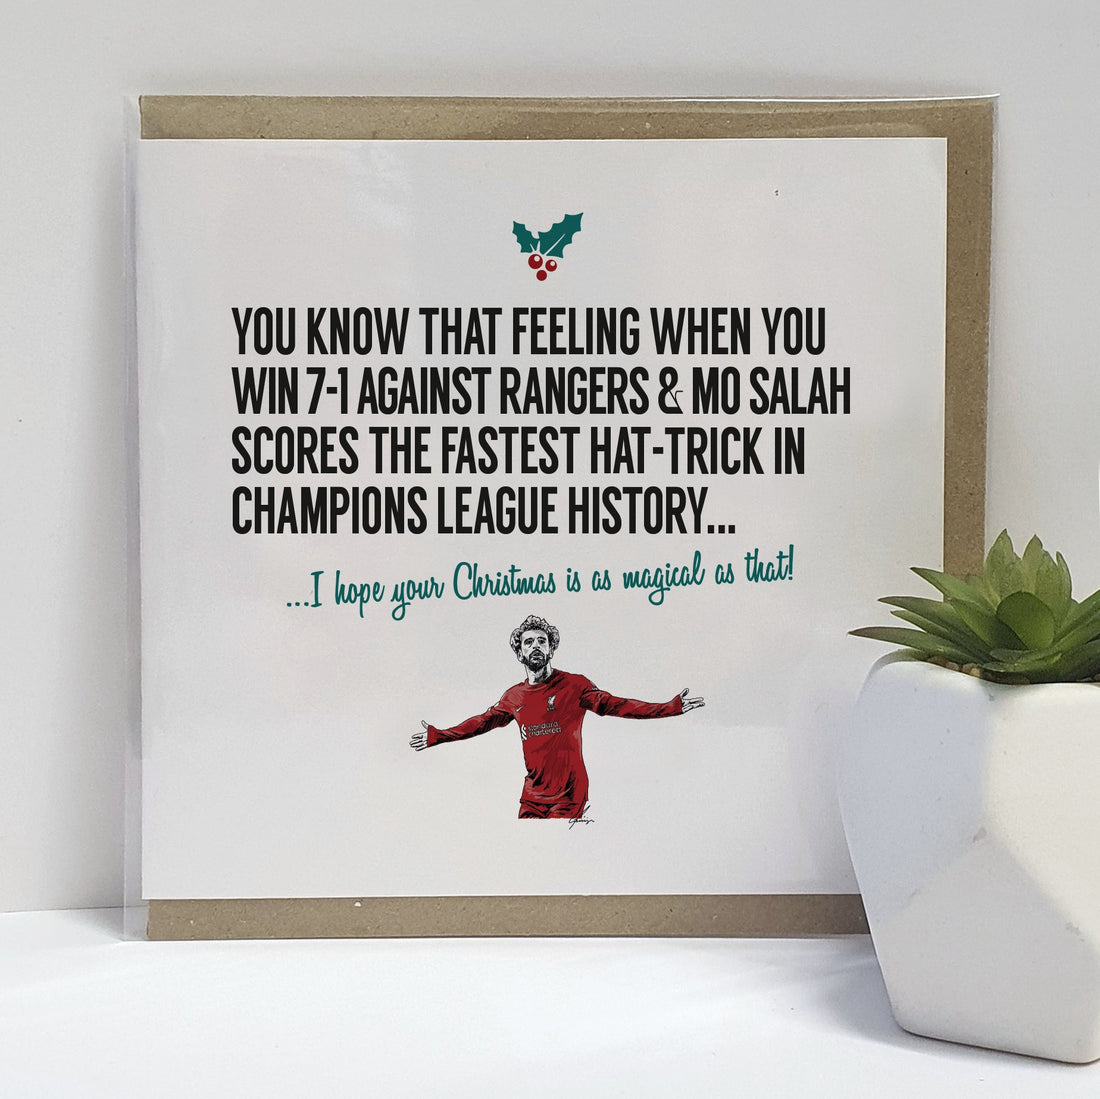 Liverpool football fan Christmas Card celebrating 7-1 champions league win against Rangers. Card reads: You know that feeling when you win 7-1 against Rangers & Mo Salah scores the fastest hat-trick in Champions League history... I hope your Christmas is as magical as that!